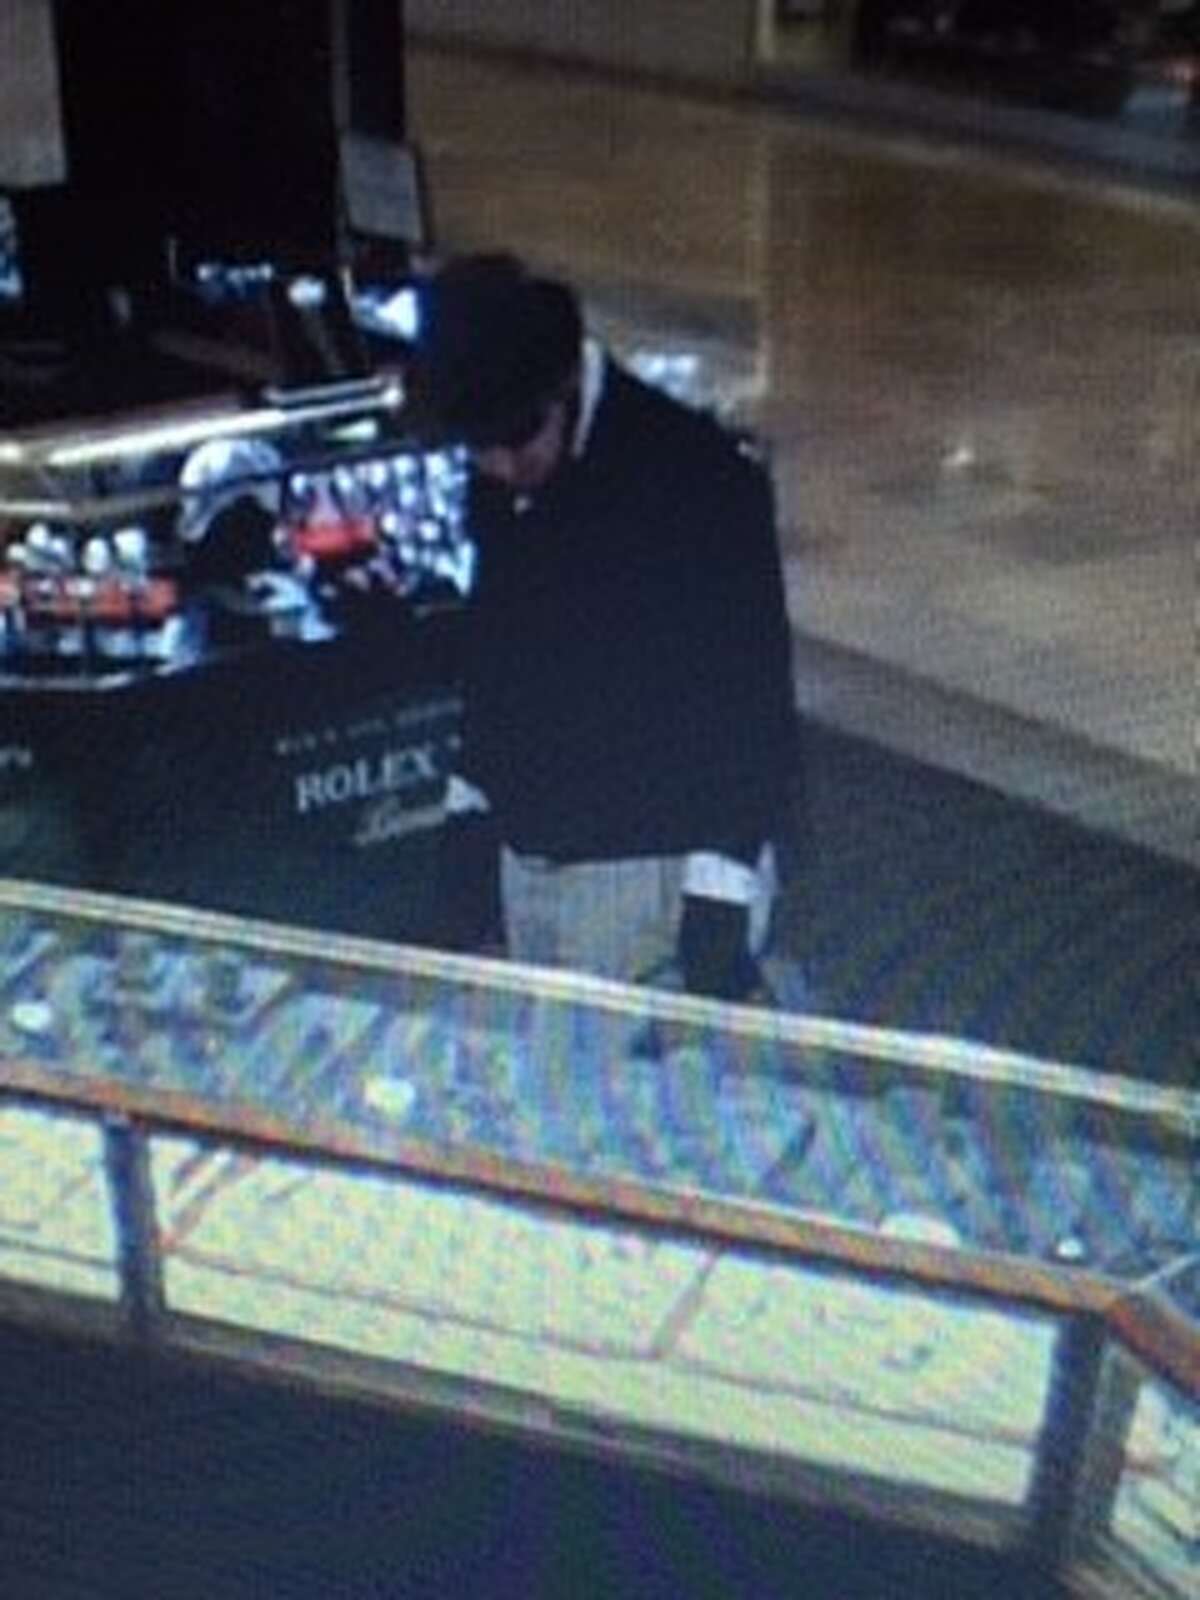 According to a statement from the San Antonio Police Department's Robbery Task Force, this man came into Gurinskys Jewelers at North Star Mall on February 24, demanding that the employee put the Rolex watches he was looking at into a bag he’d brought into the store.